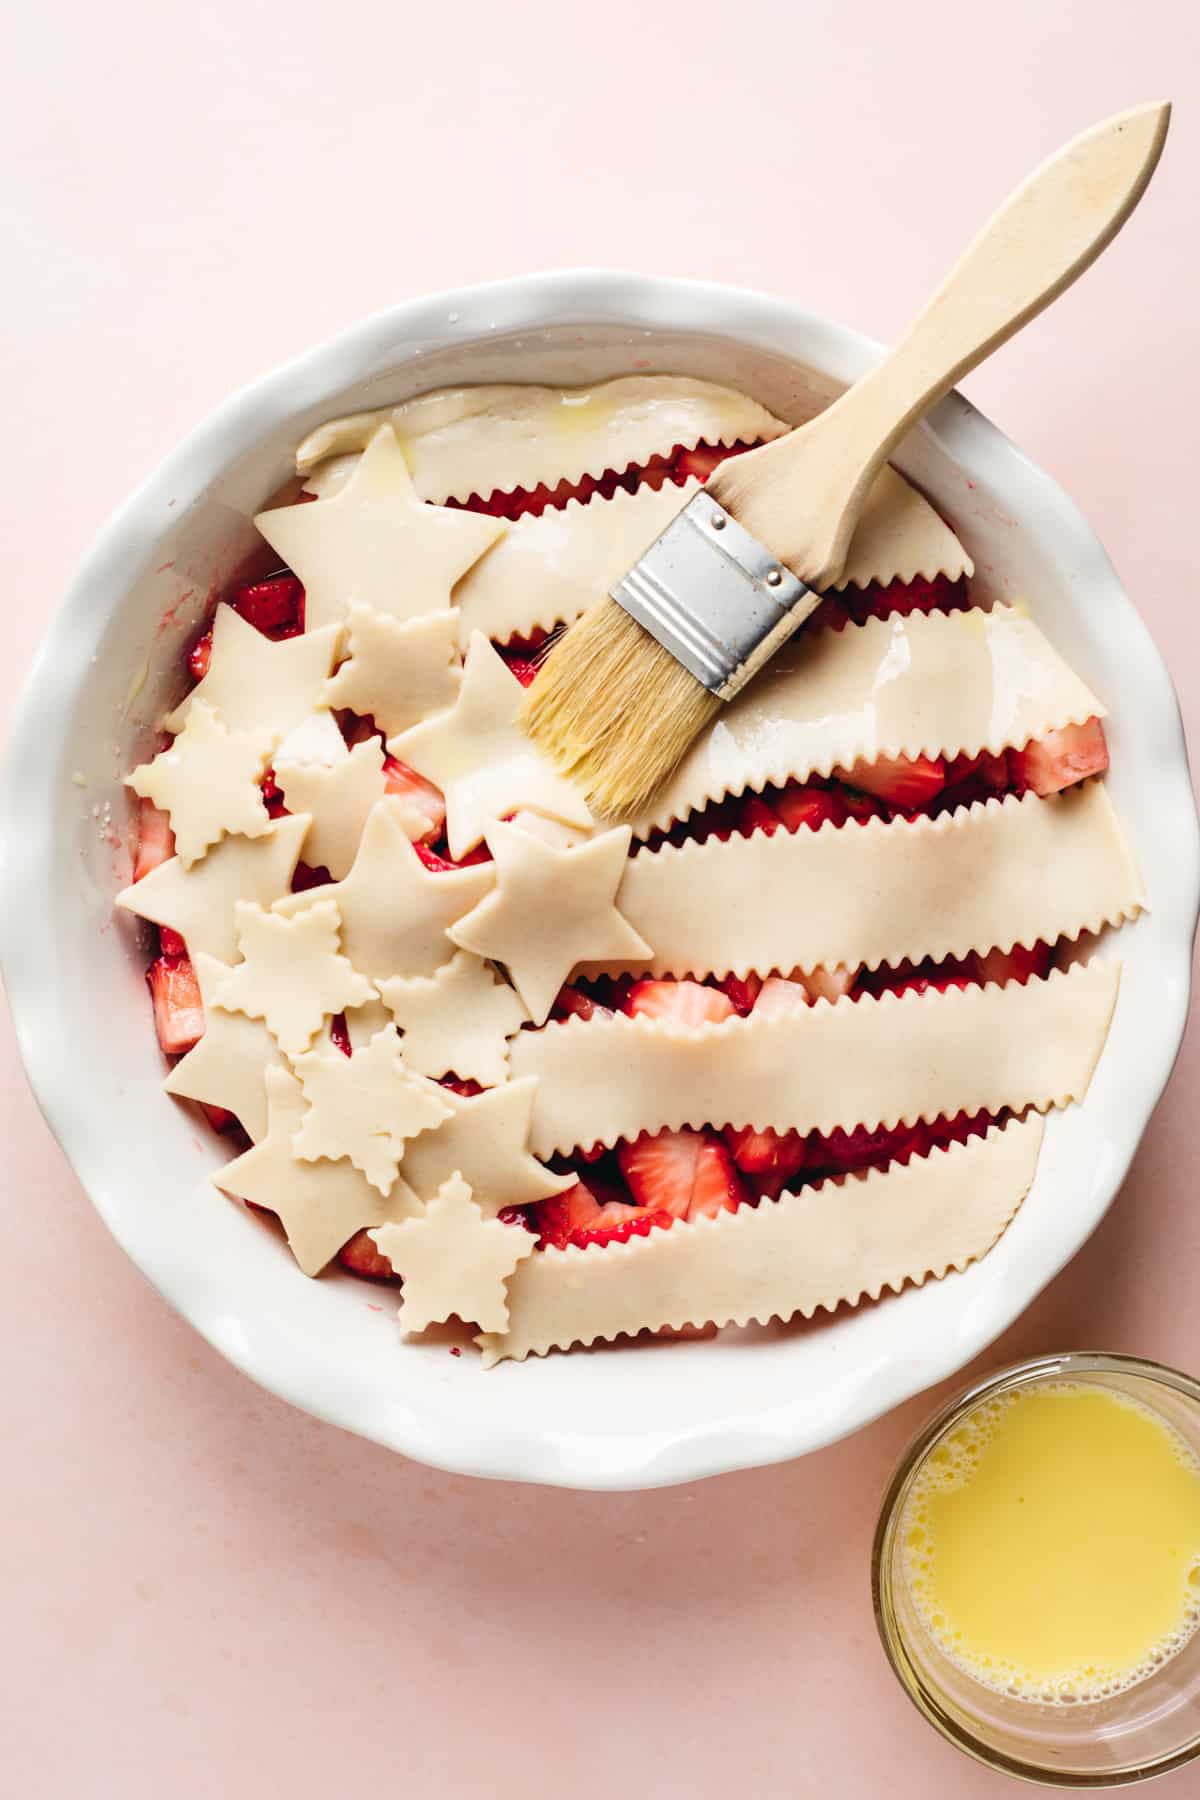 Pie dish filled with strawberry cobbler filling, topped with stars and stripes cut out of pie crust and a brush to put egg wash on. 